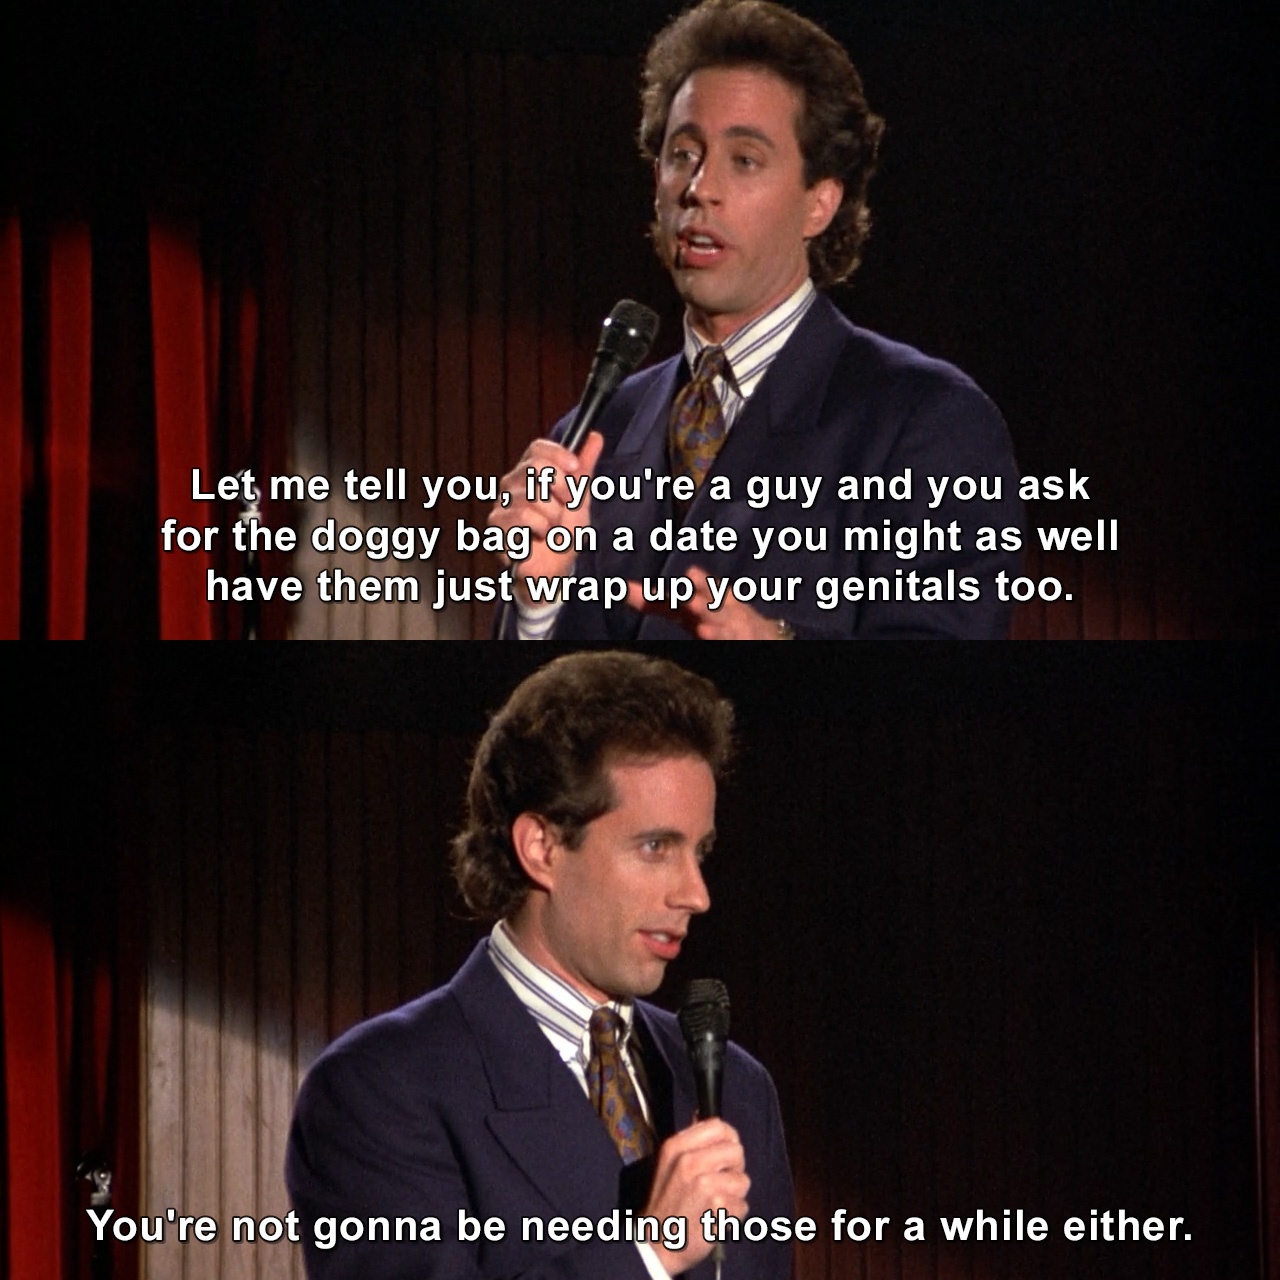 Seinfeld — This is a PSA from Seinfeld kindly asking you not